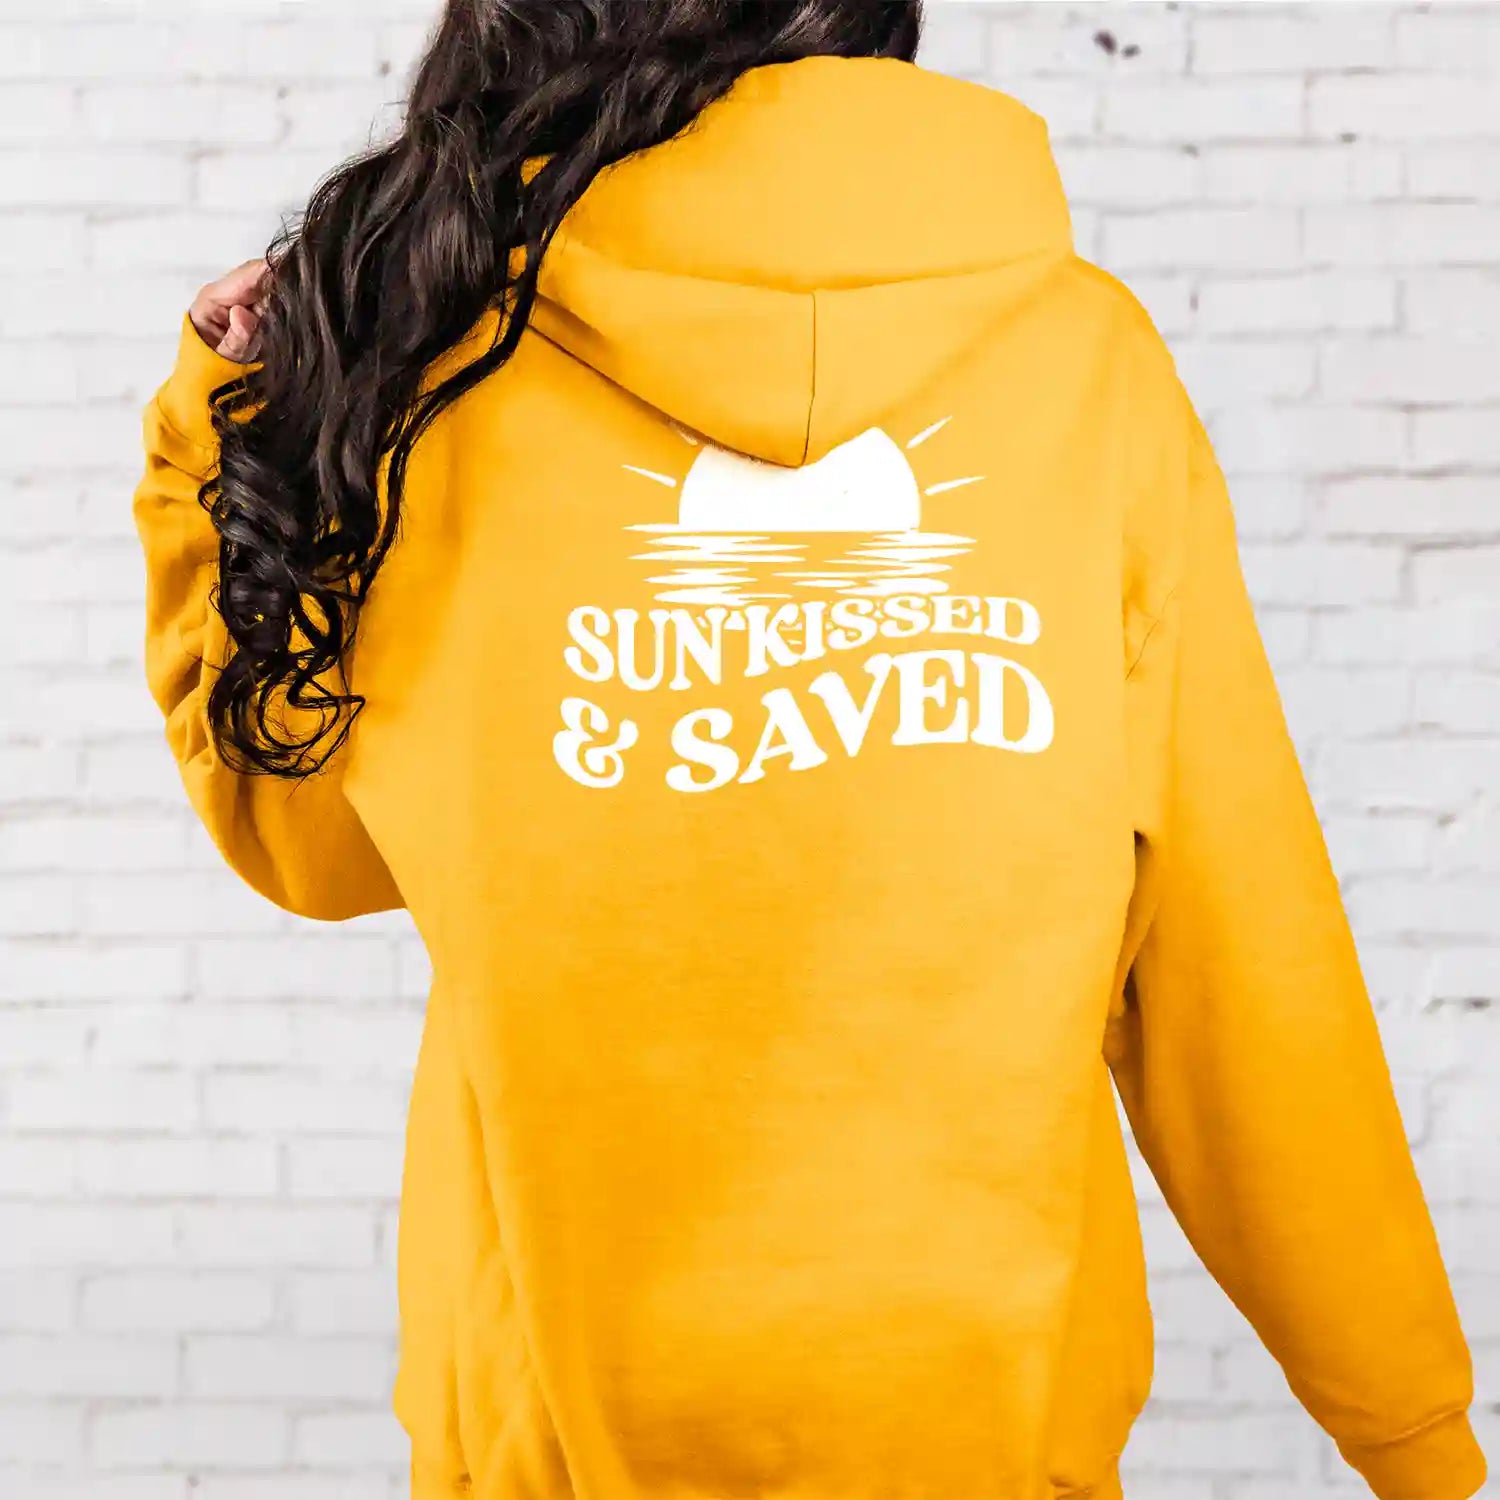 A woman wearing a yellow Sunkissed & Saved Hoodie from Be Still and Know that says "sunstruck" and "faith saved".